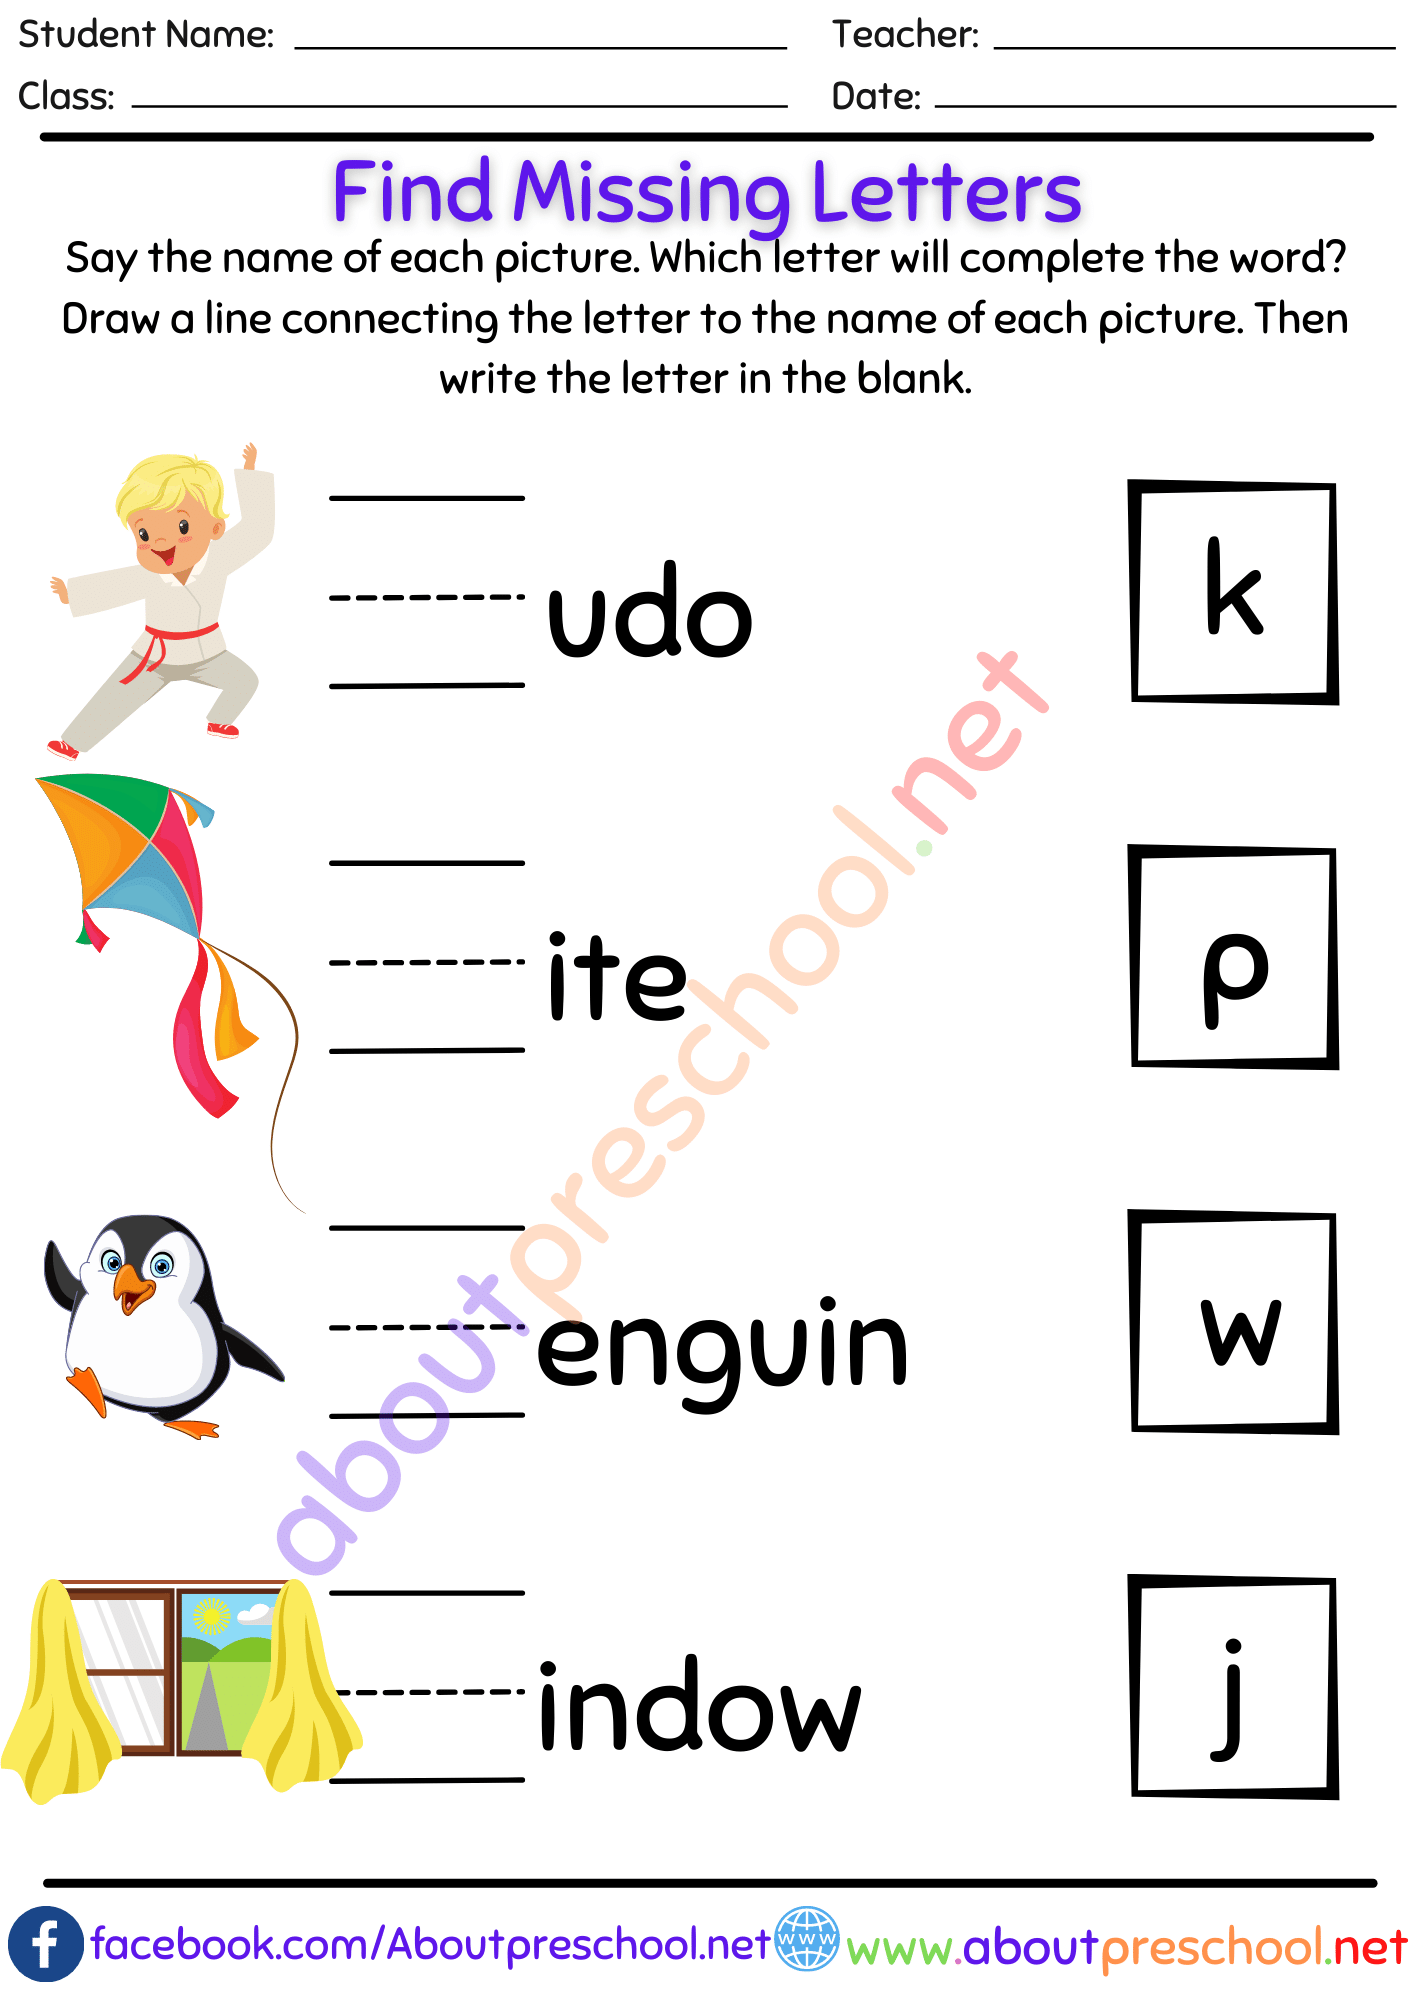 Find Missing Letters-19